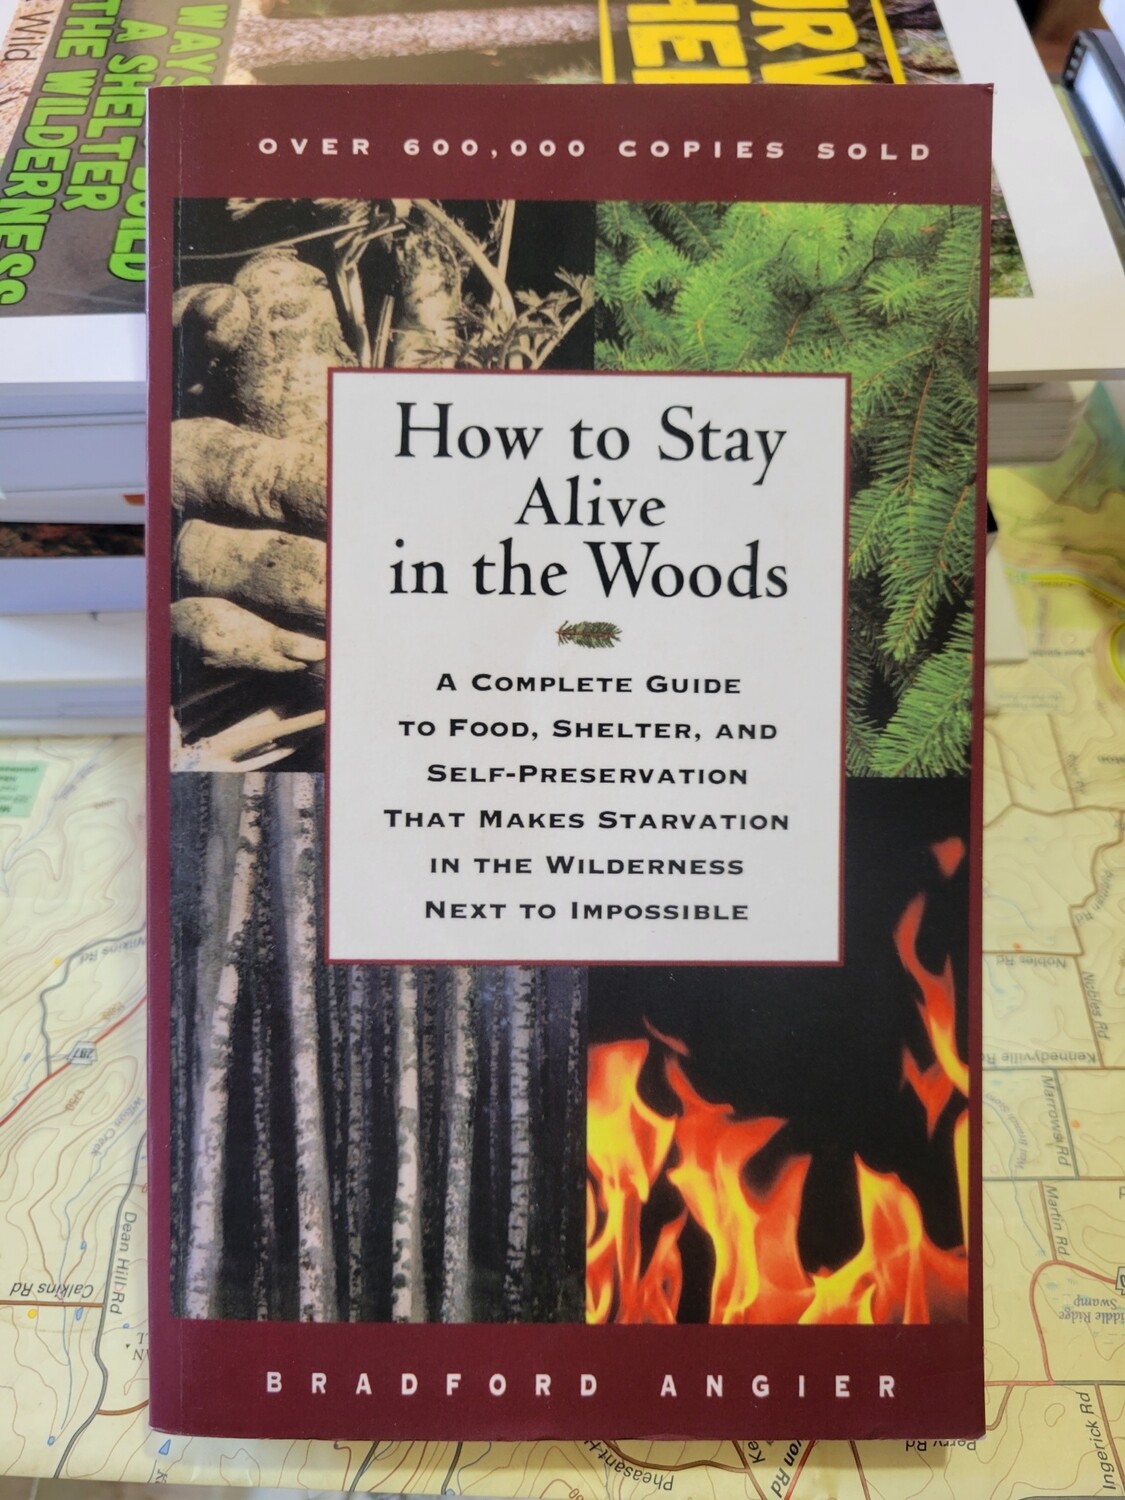 How to create a Survival Kit for Wilderness
